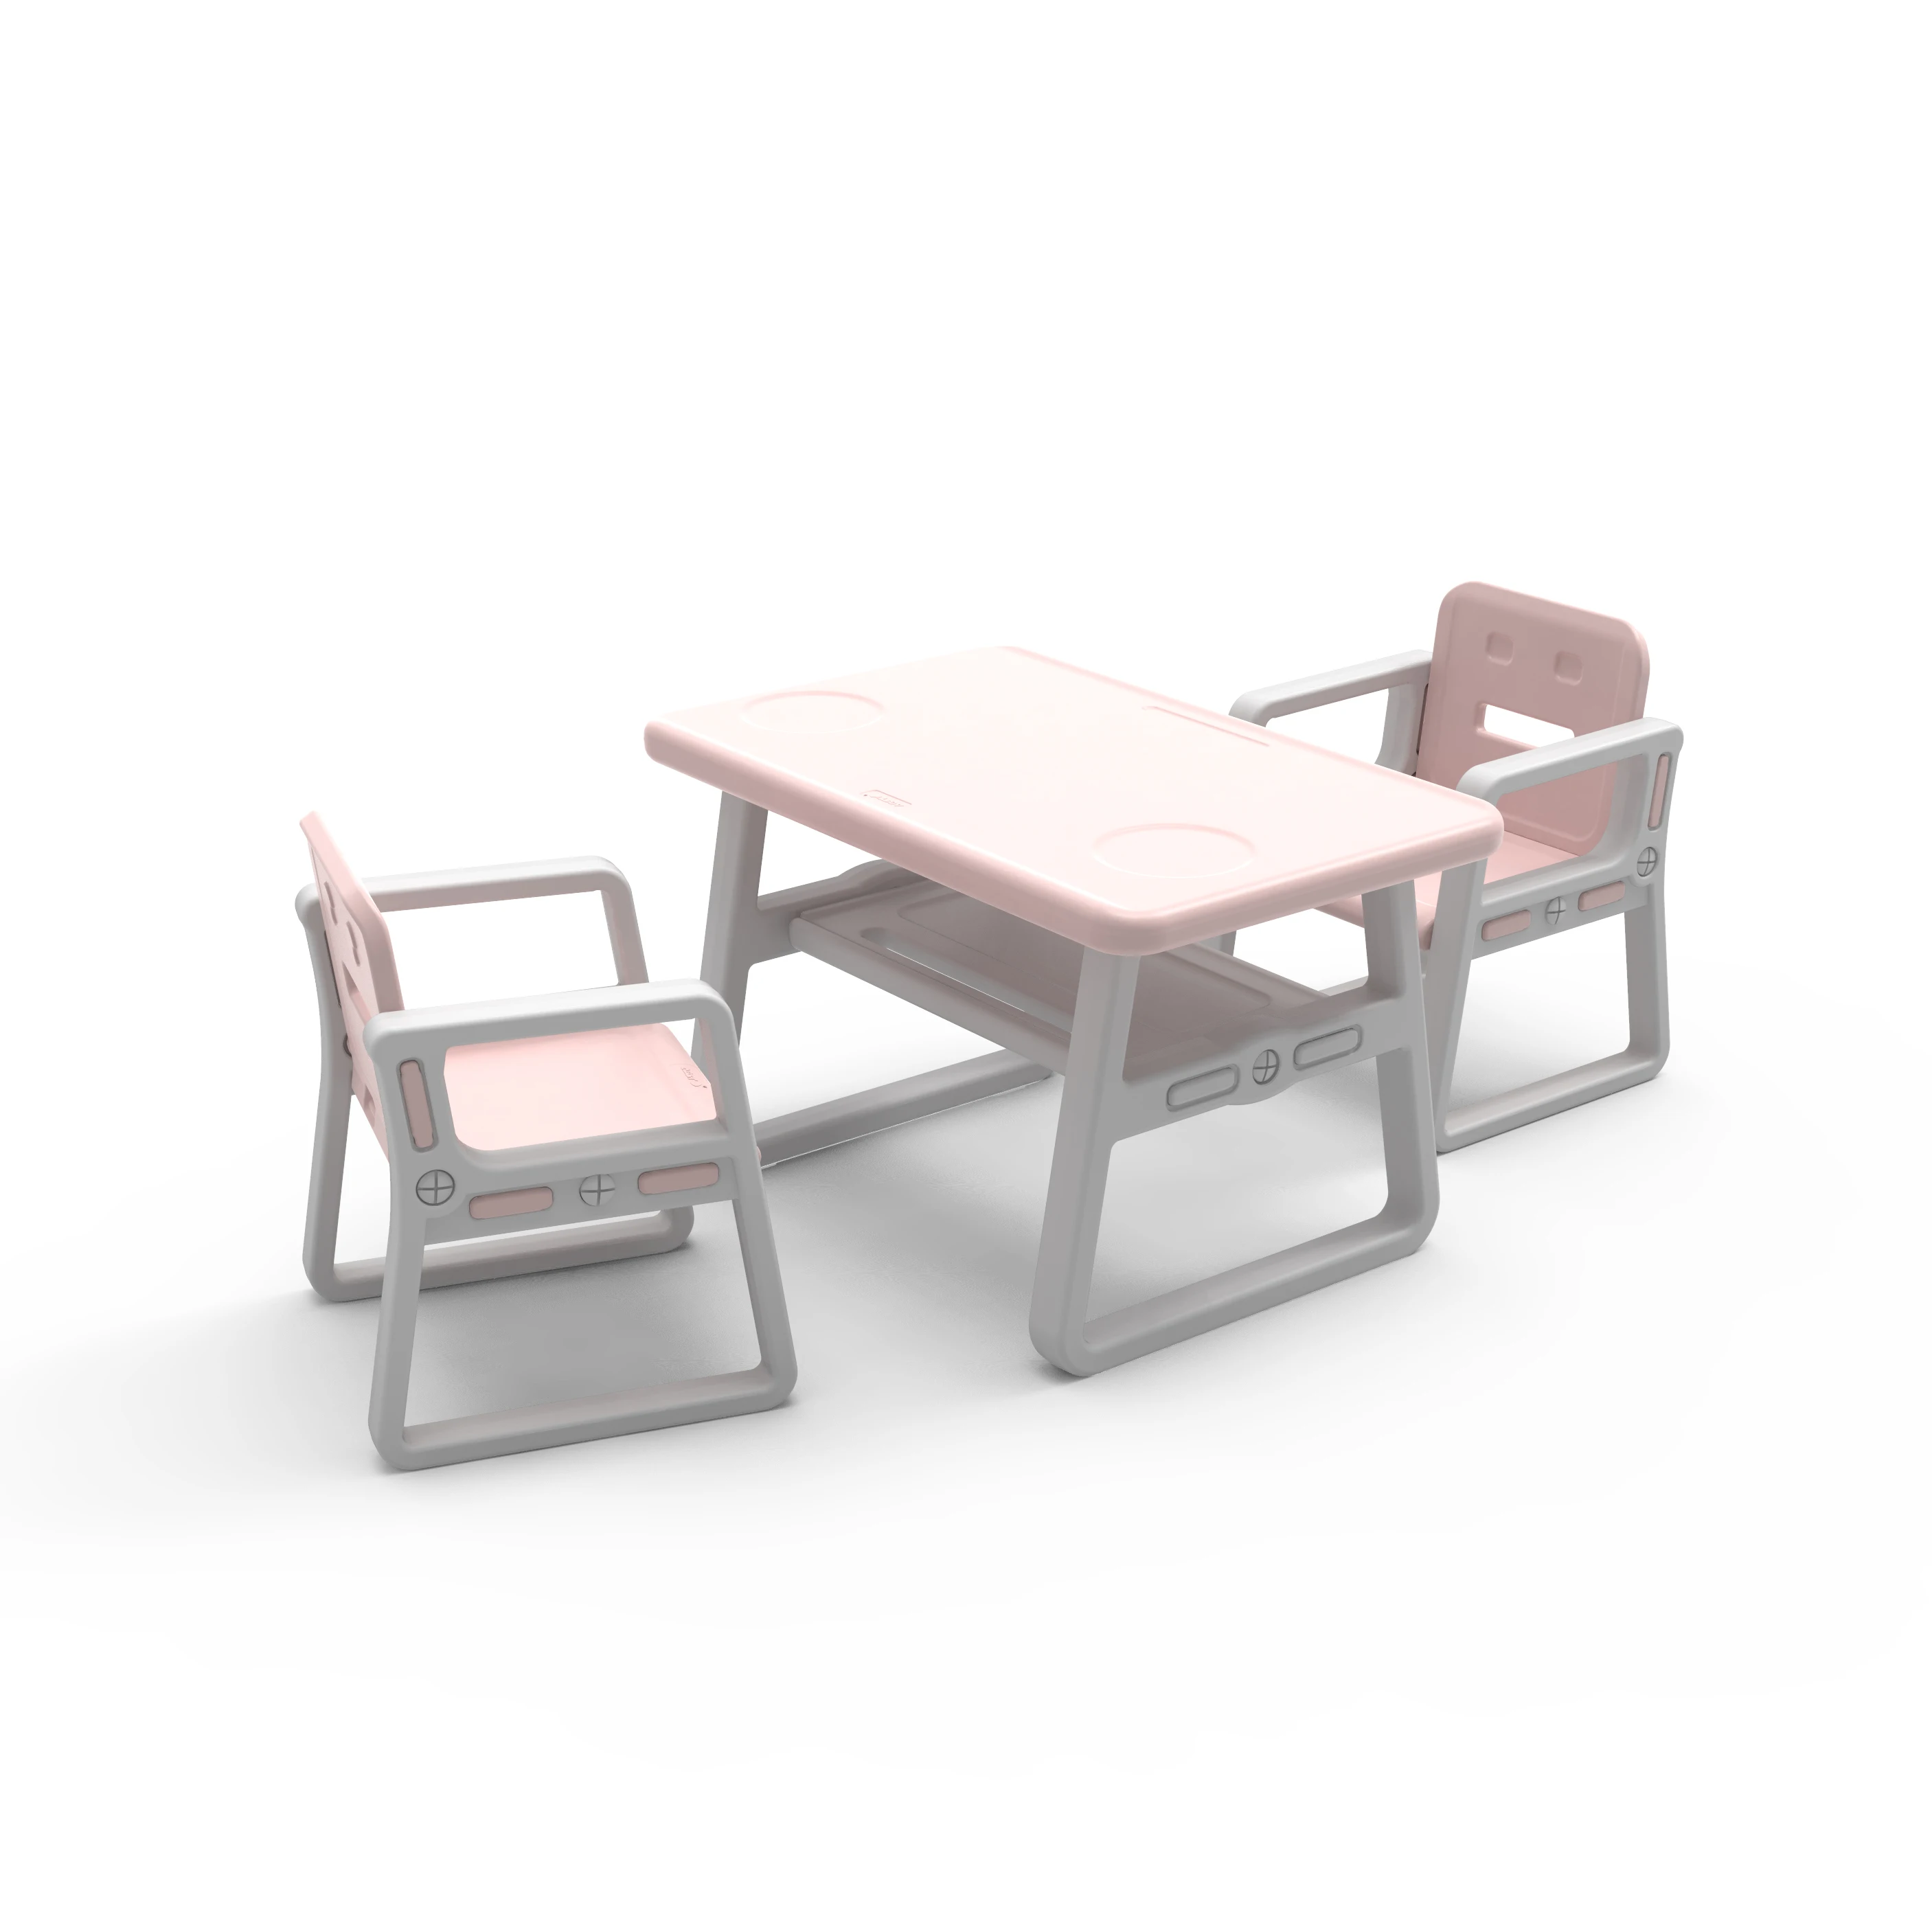 Plastic Table And 2 Baby Chairs Set For Kids Buy Baby Chairs